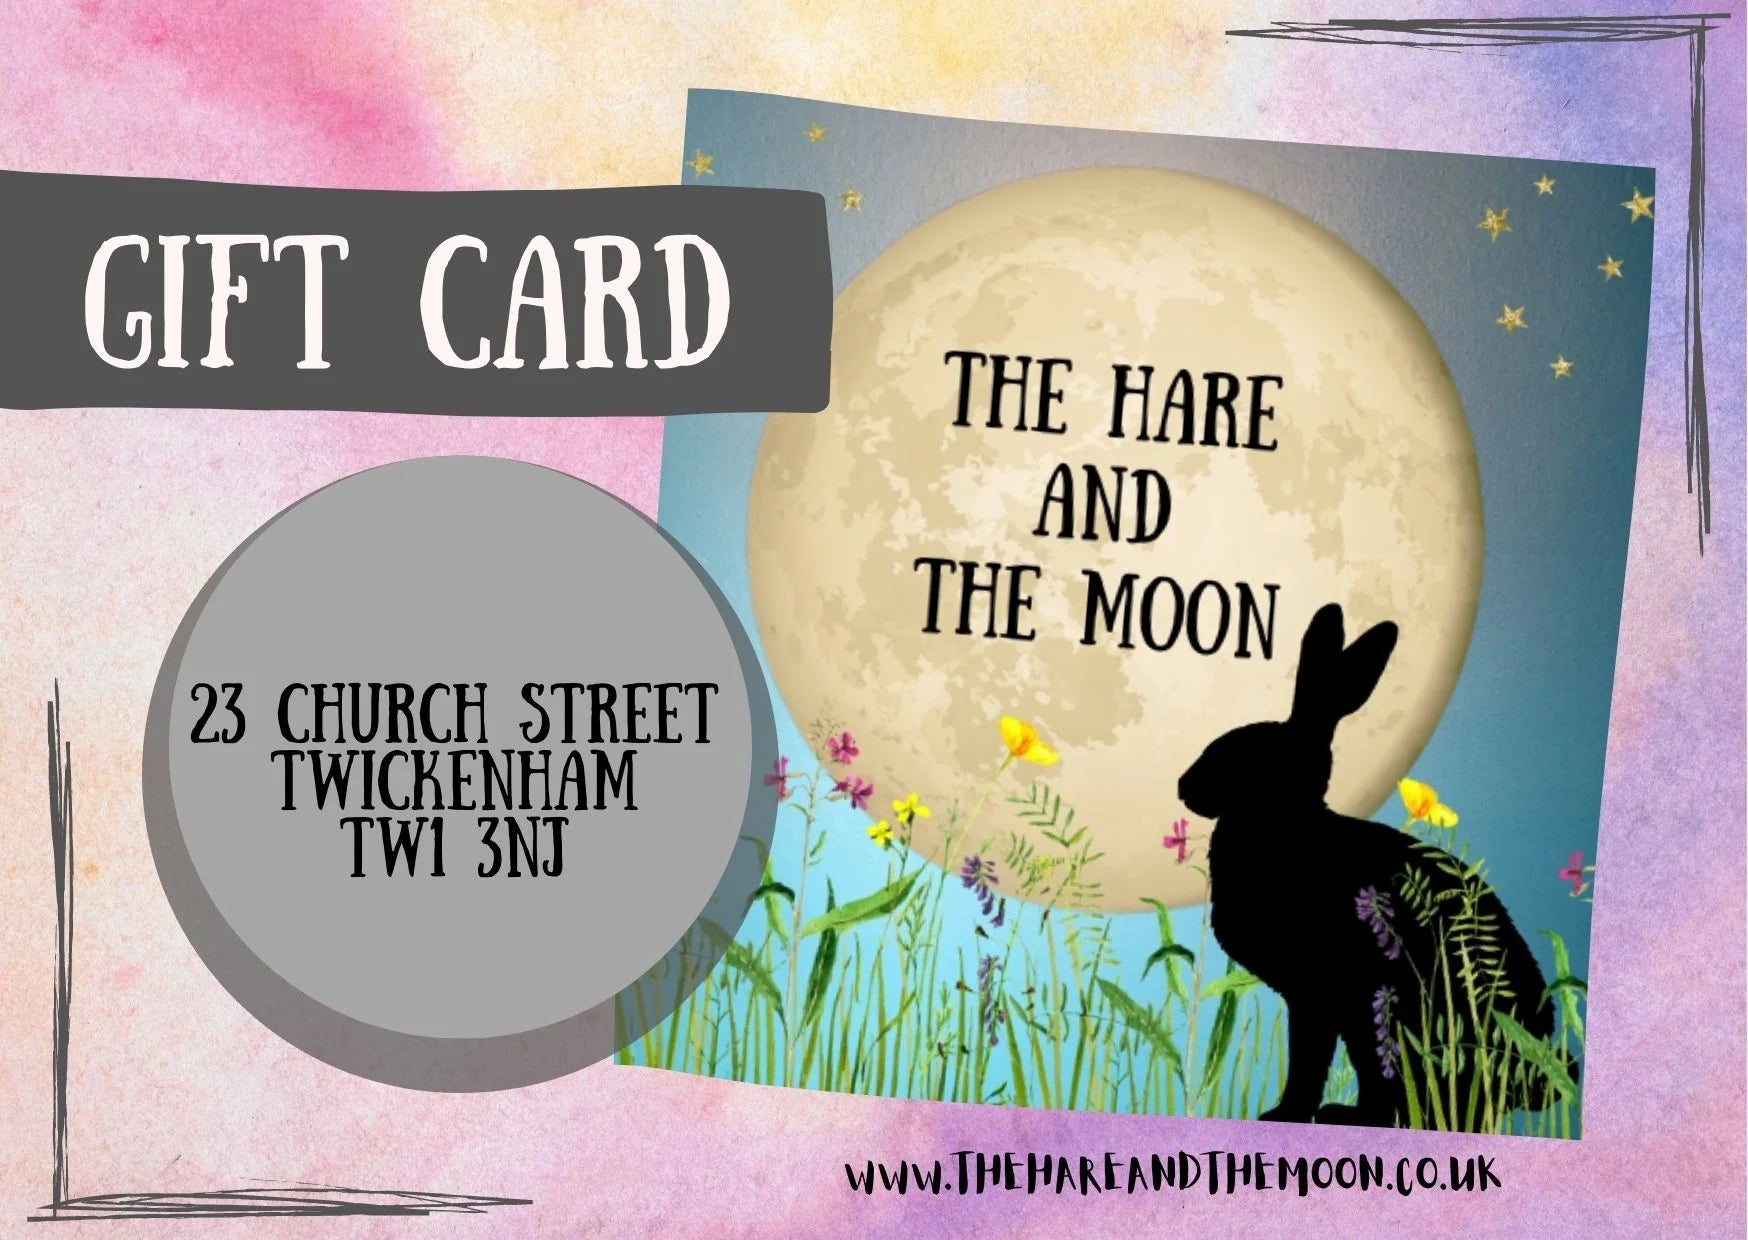 Gift Vouchers - The Hare and the Moon